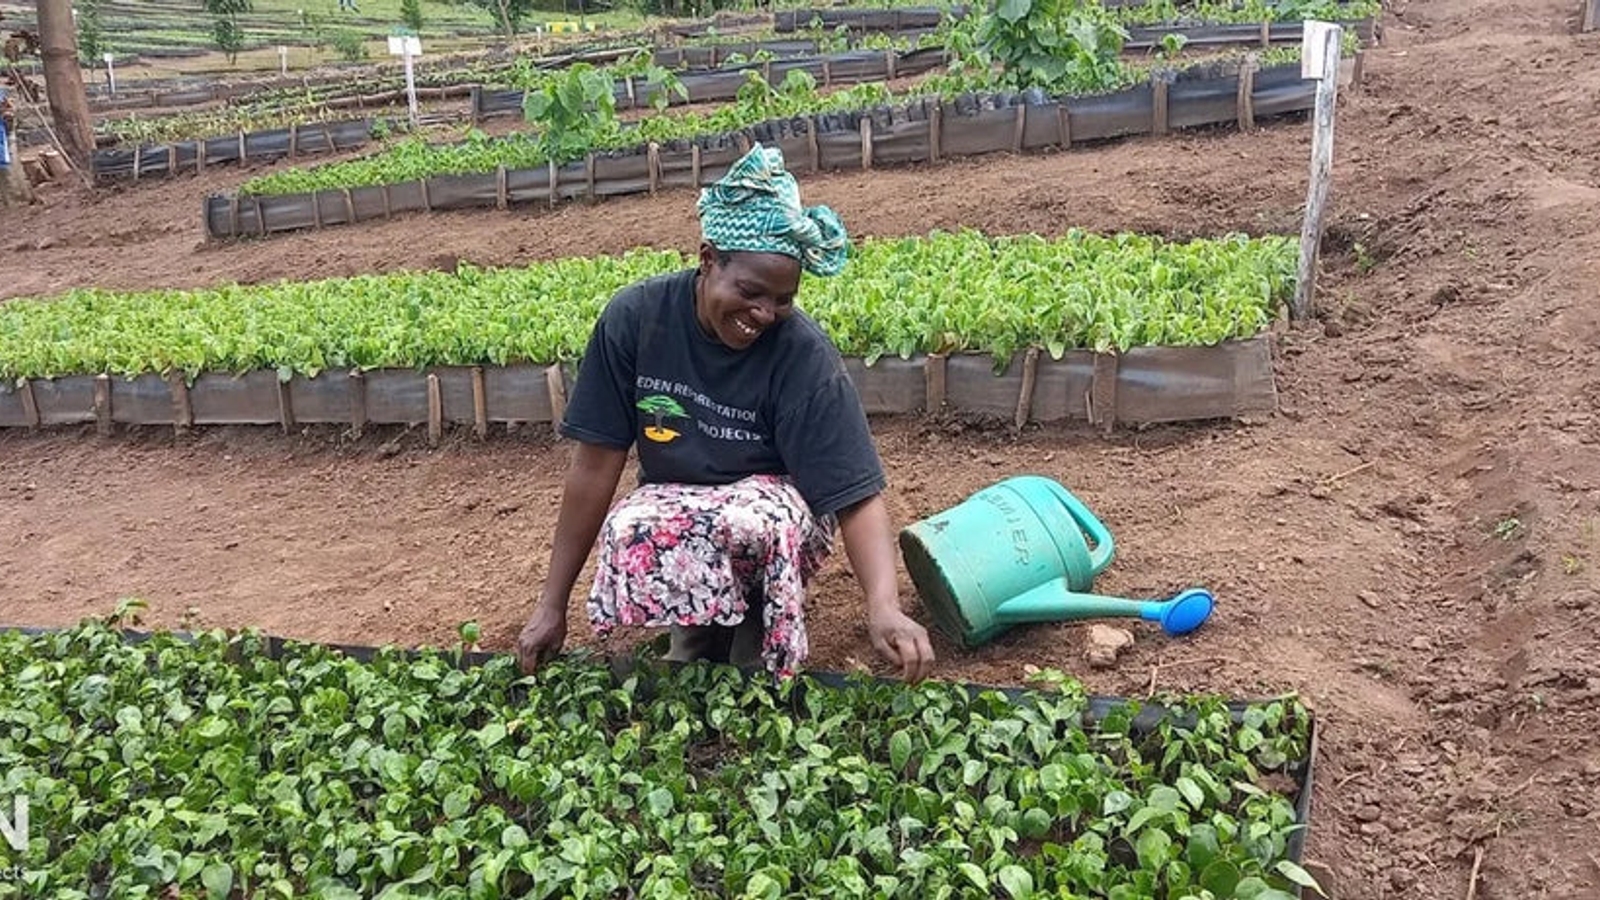 A photo of a smiling Kenyan worker wearing a headscarf, tending to a bed of plants 